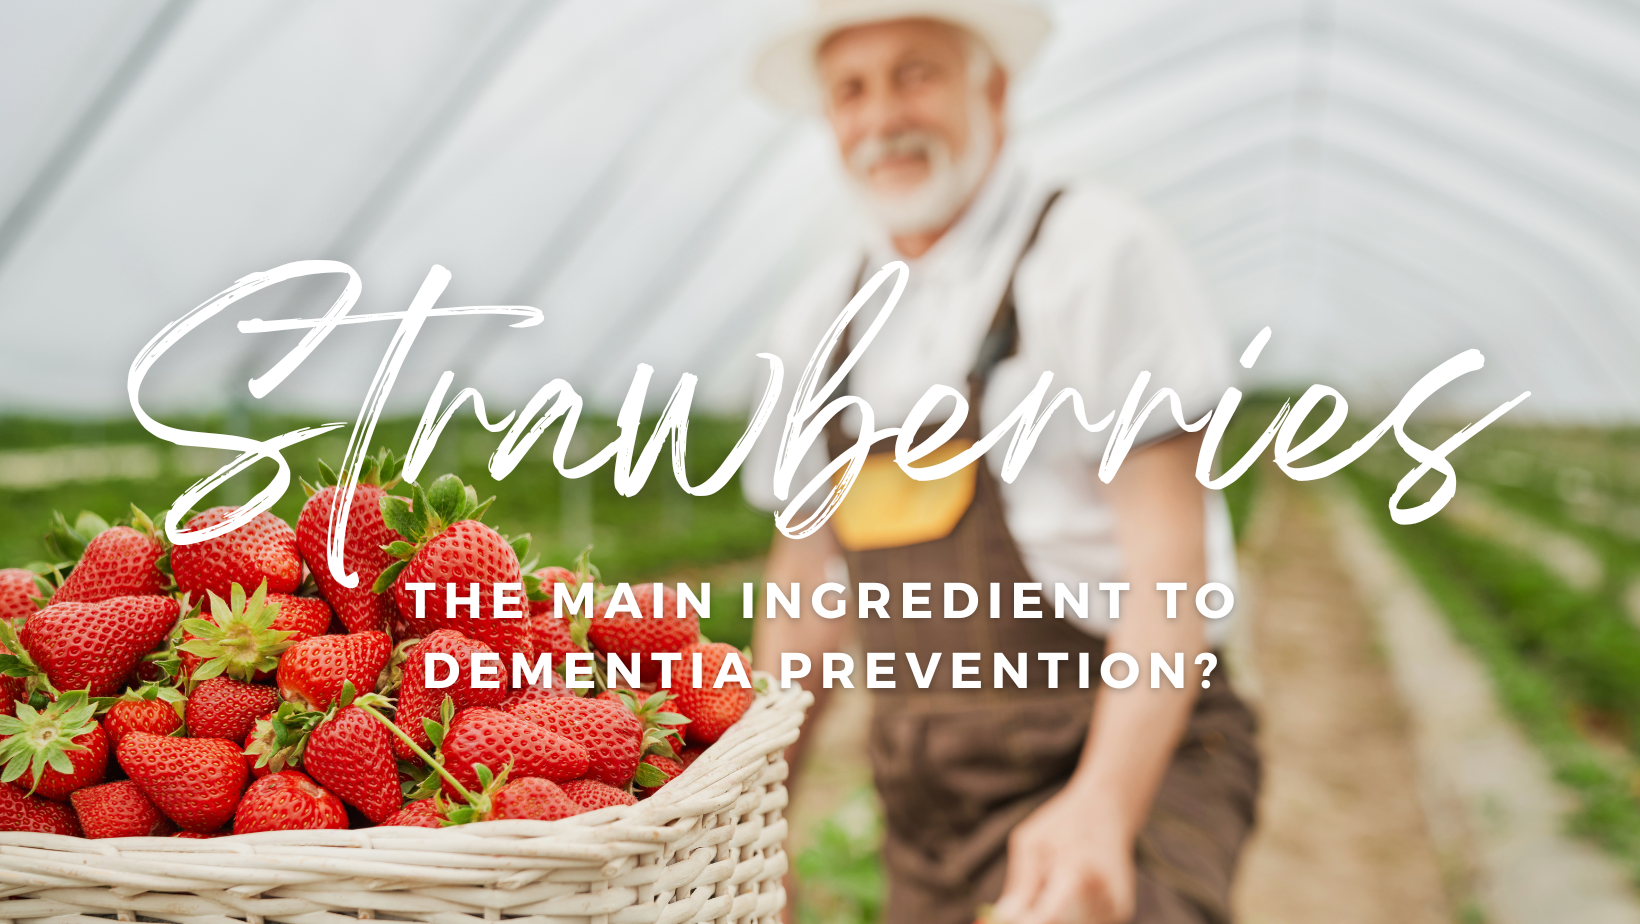 Strawberries might be the main ingredient to dementia prevention